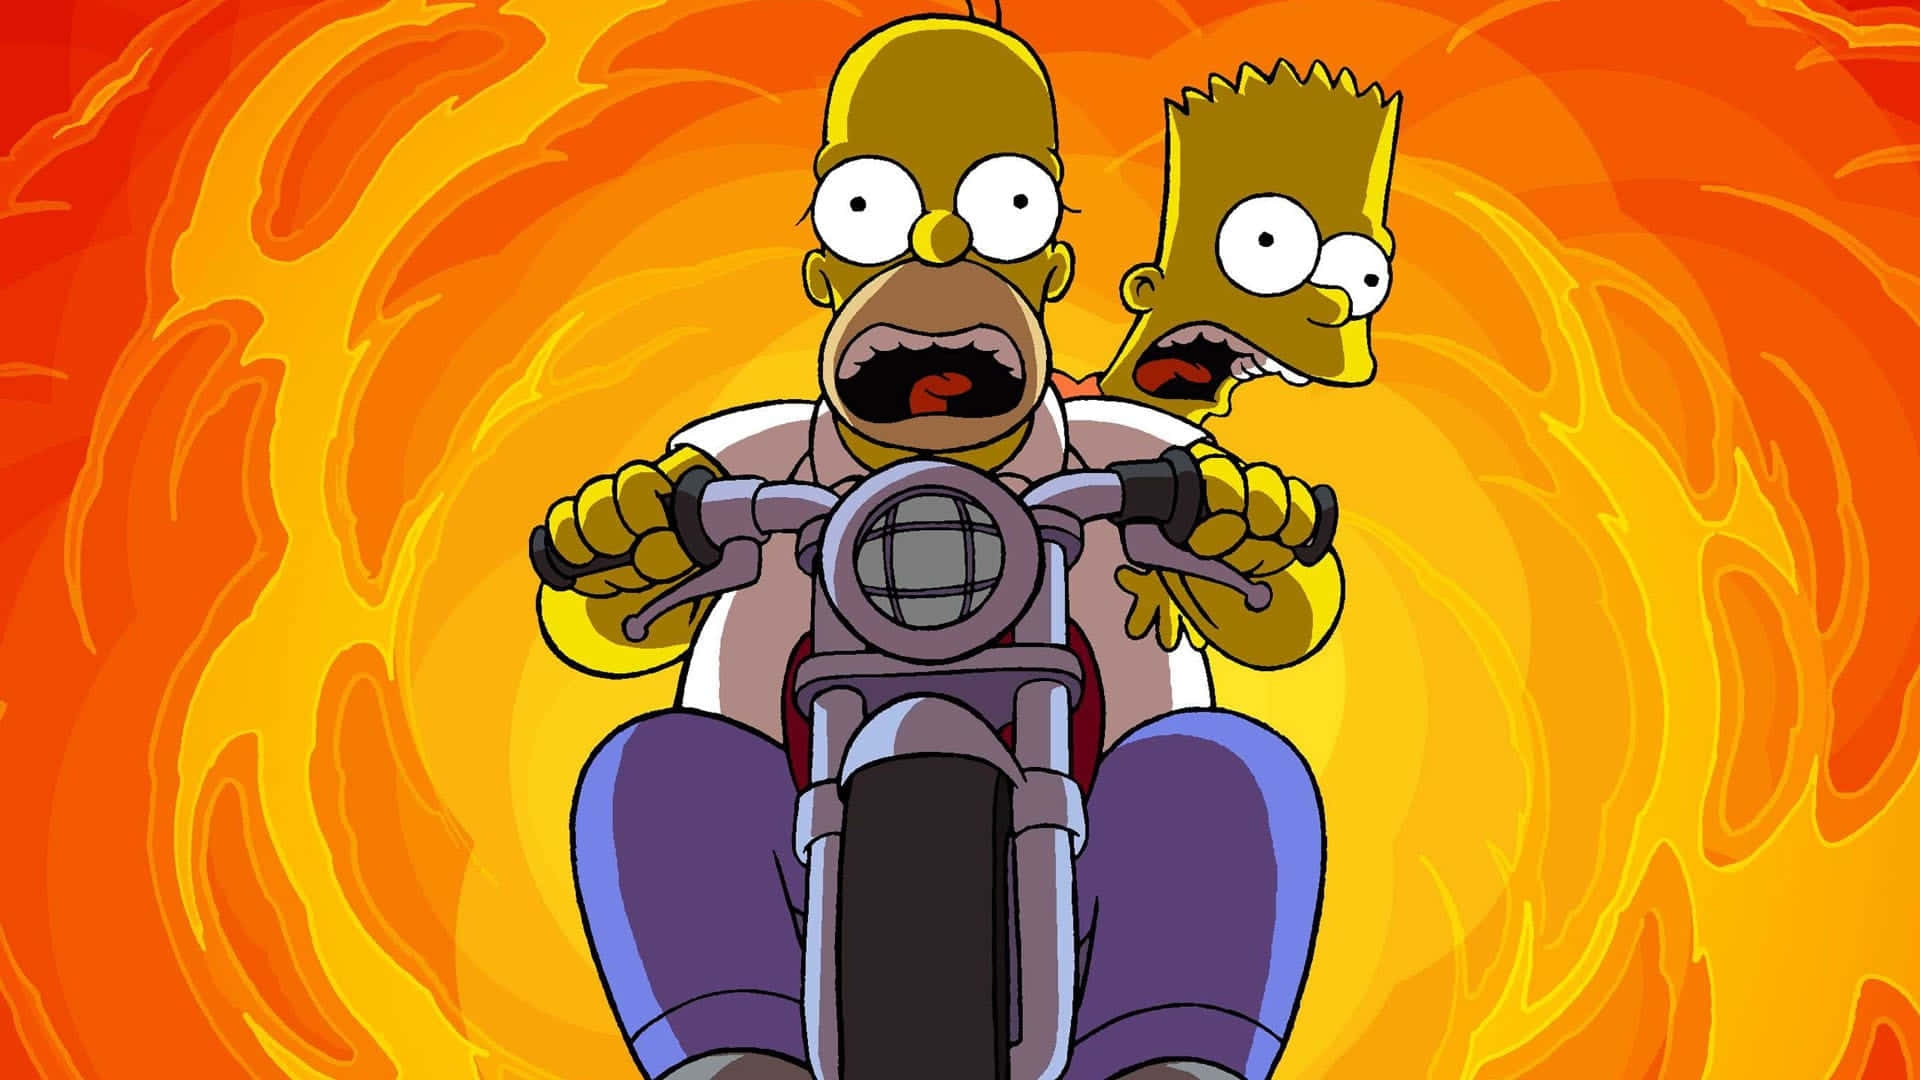 Suprise your friends with the Simpsons Pc! Wallpaper